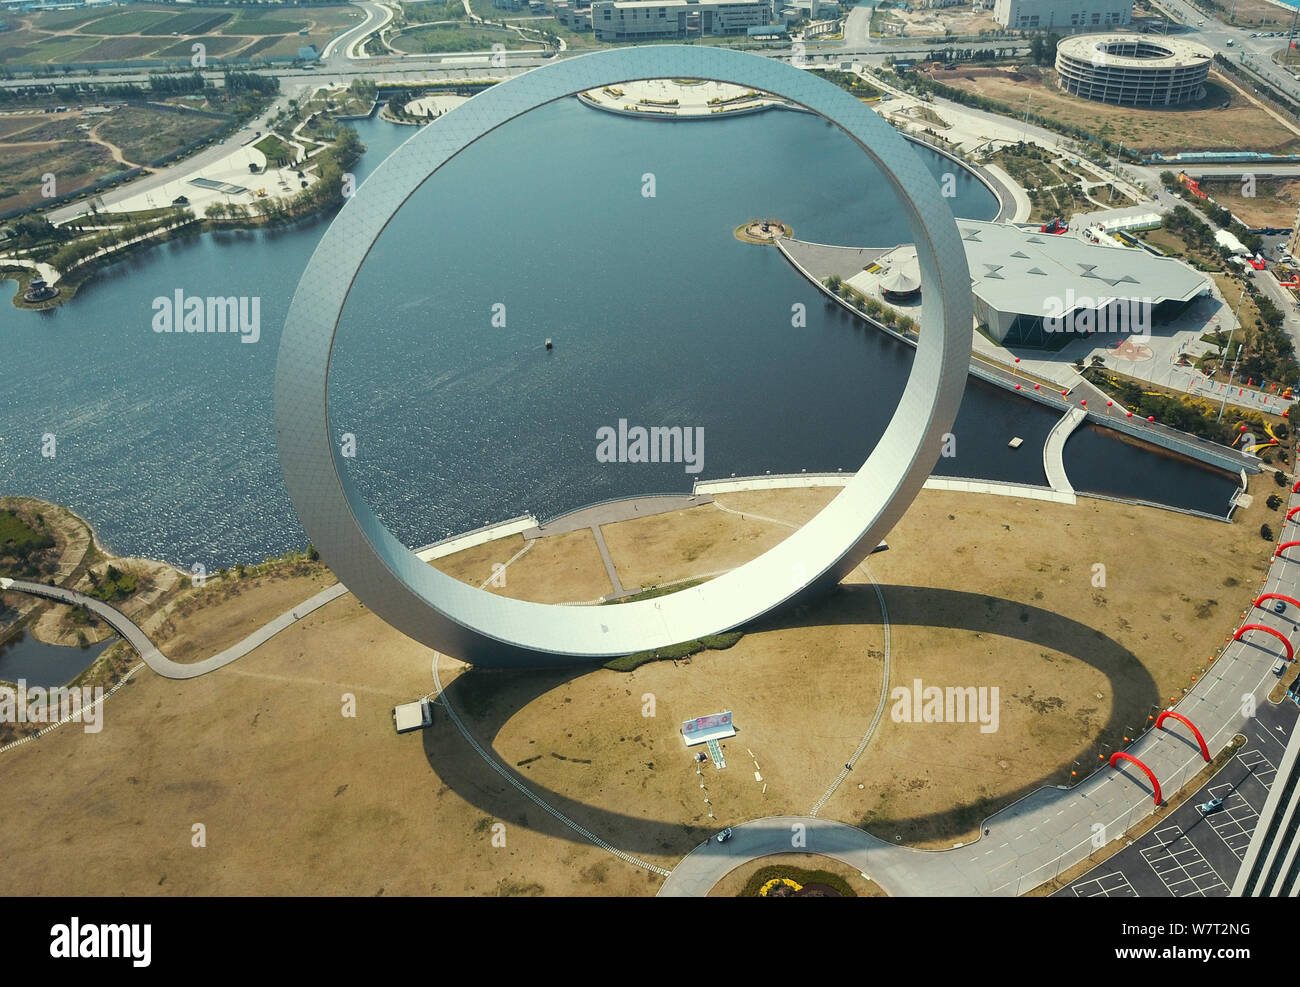 Aerial view of a gigantic steel loop dubbed the "Ring of Life" in Fushun city, northeast China's Liaoning province, 20 May 2017.   A new landmark ¨C a Stock Photo